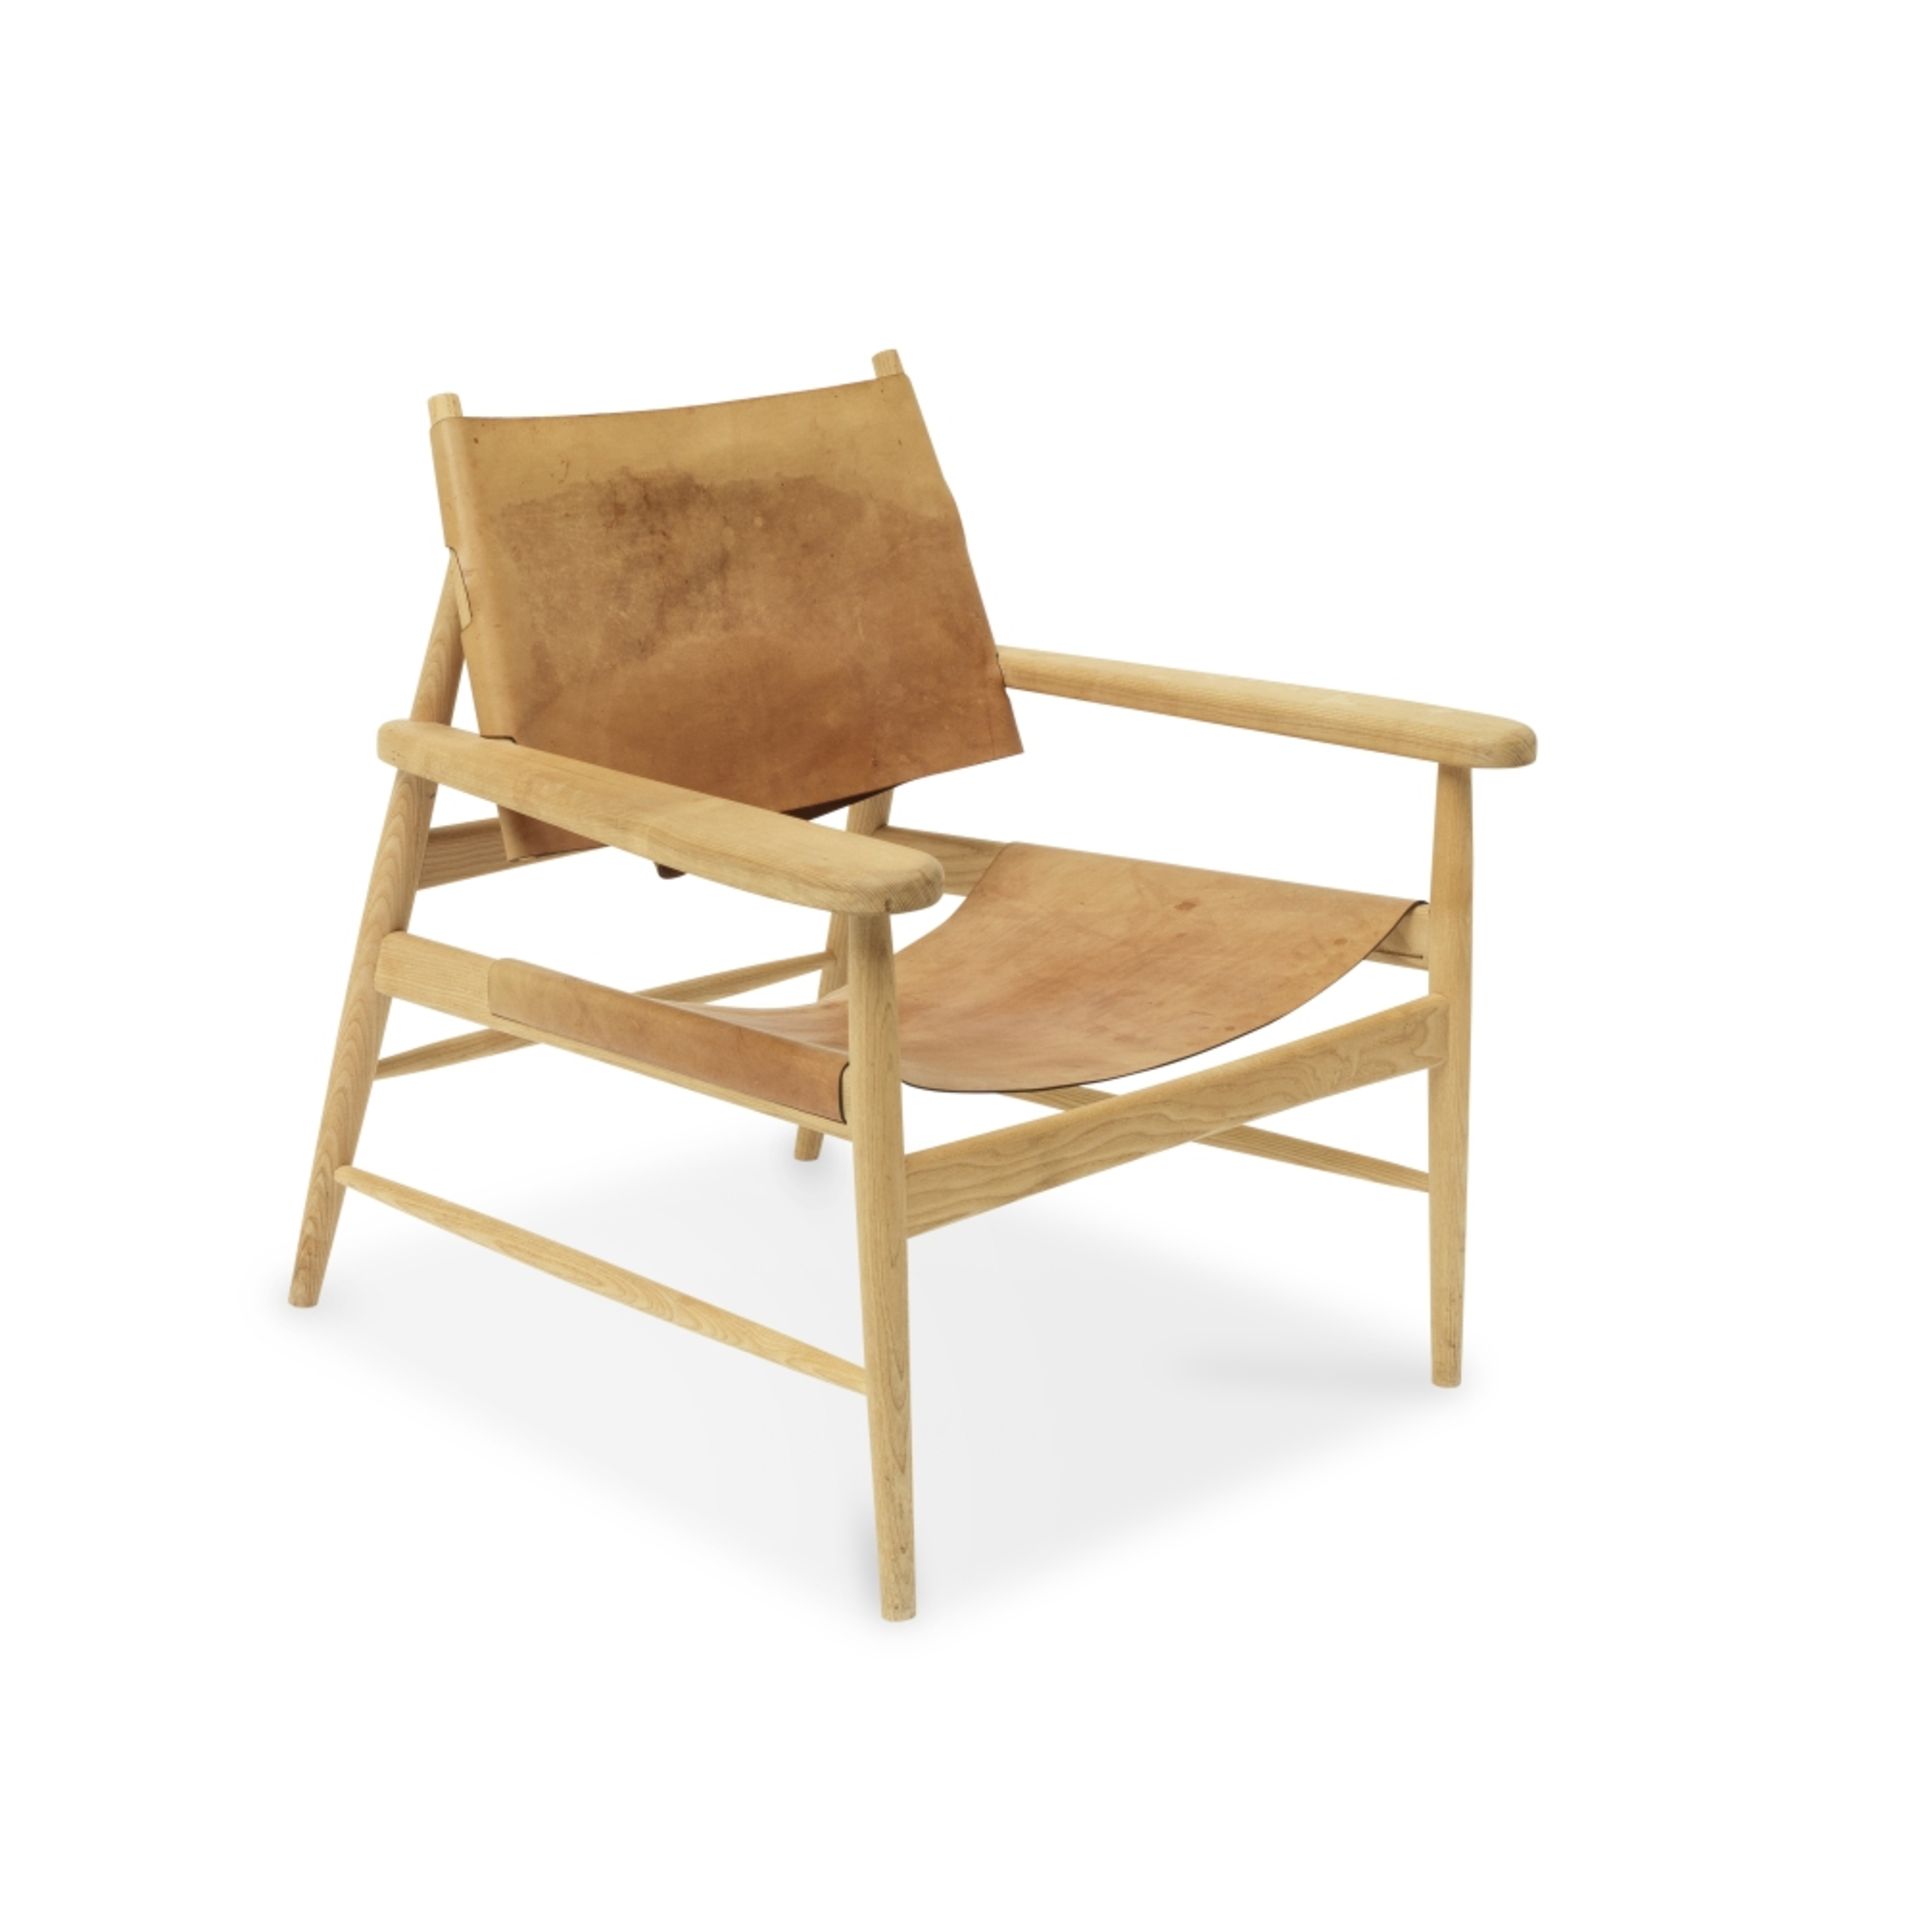 A prototype beech and leather safari-type armchairDesigned by Sir Terence Conran, made by Benchma...